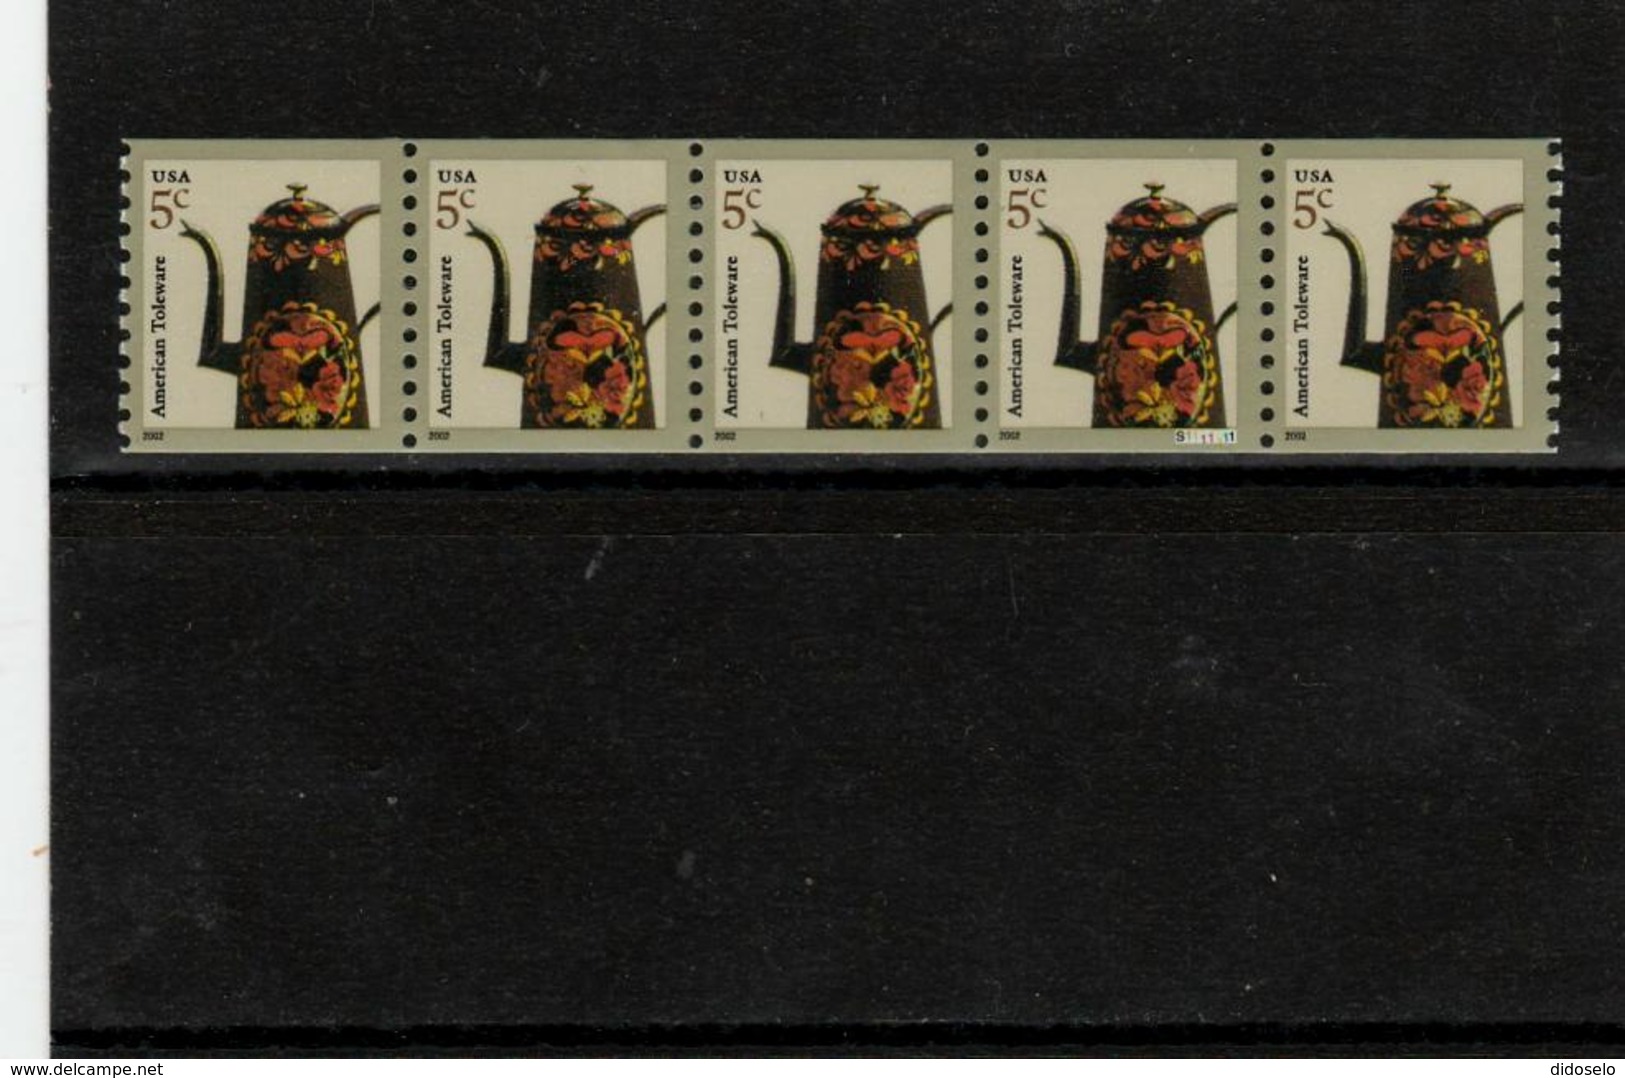 USA - Michel # 3580-- Strip Of 5-- With # S11111- MNH (**) - Coils (Plate Numbers)